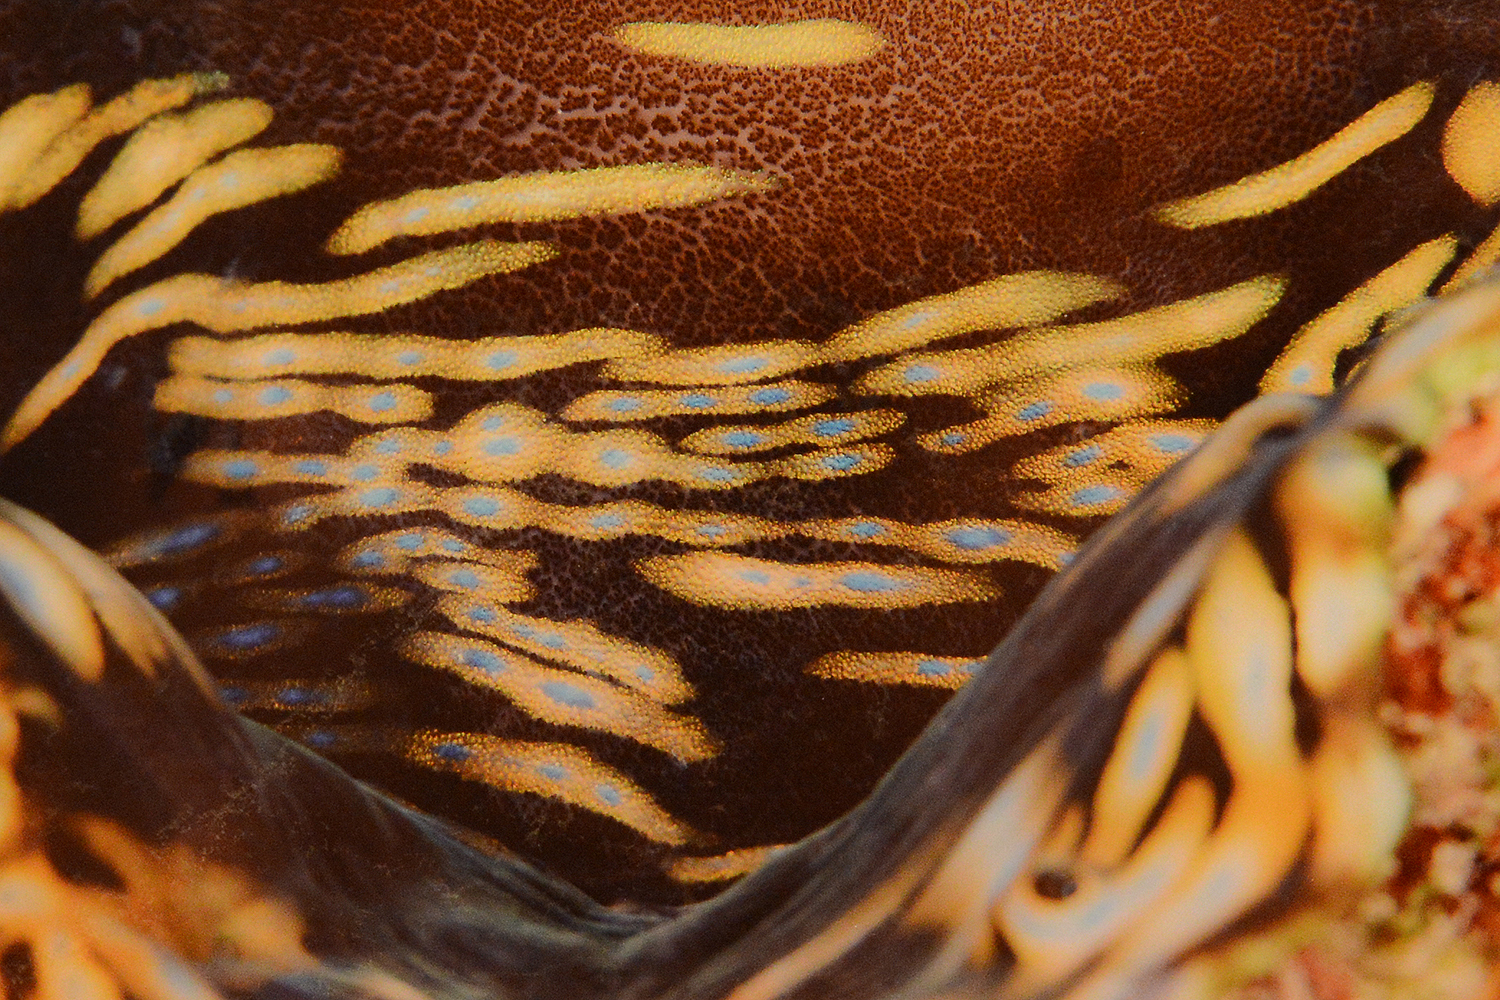 Pictured is Boger's "Mantle of Blue-Dotted Brown Giant Clam" photographed in 2014. 